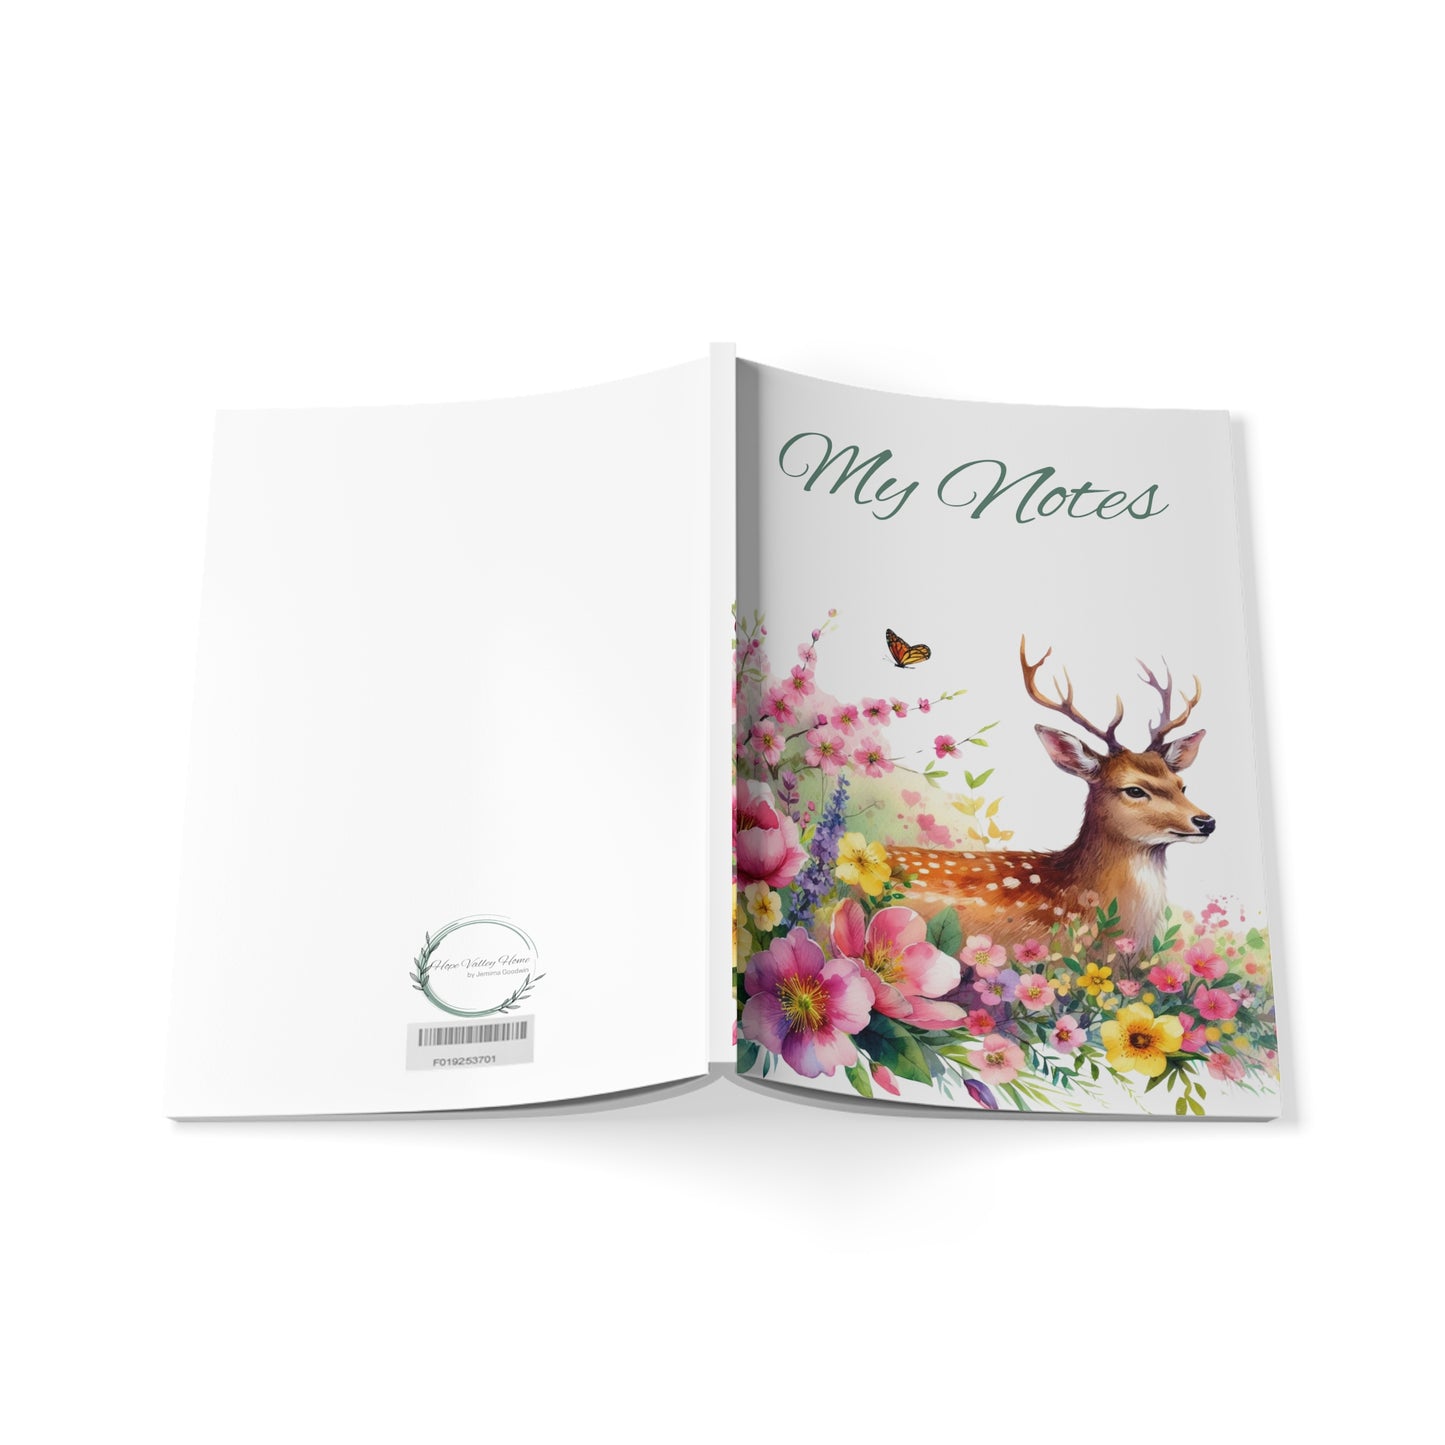 Deer Softback Notebook | Stationery by Hope Valley Home